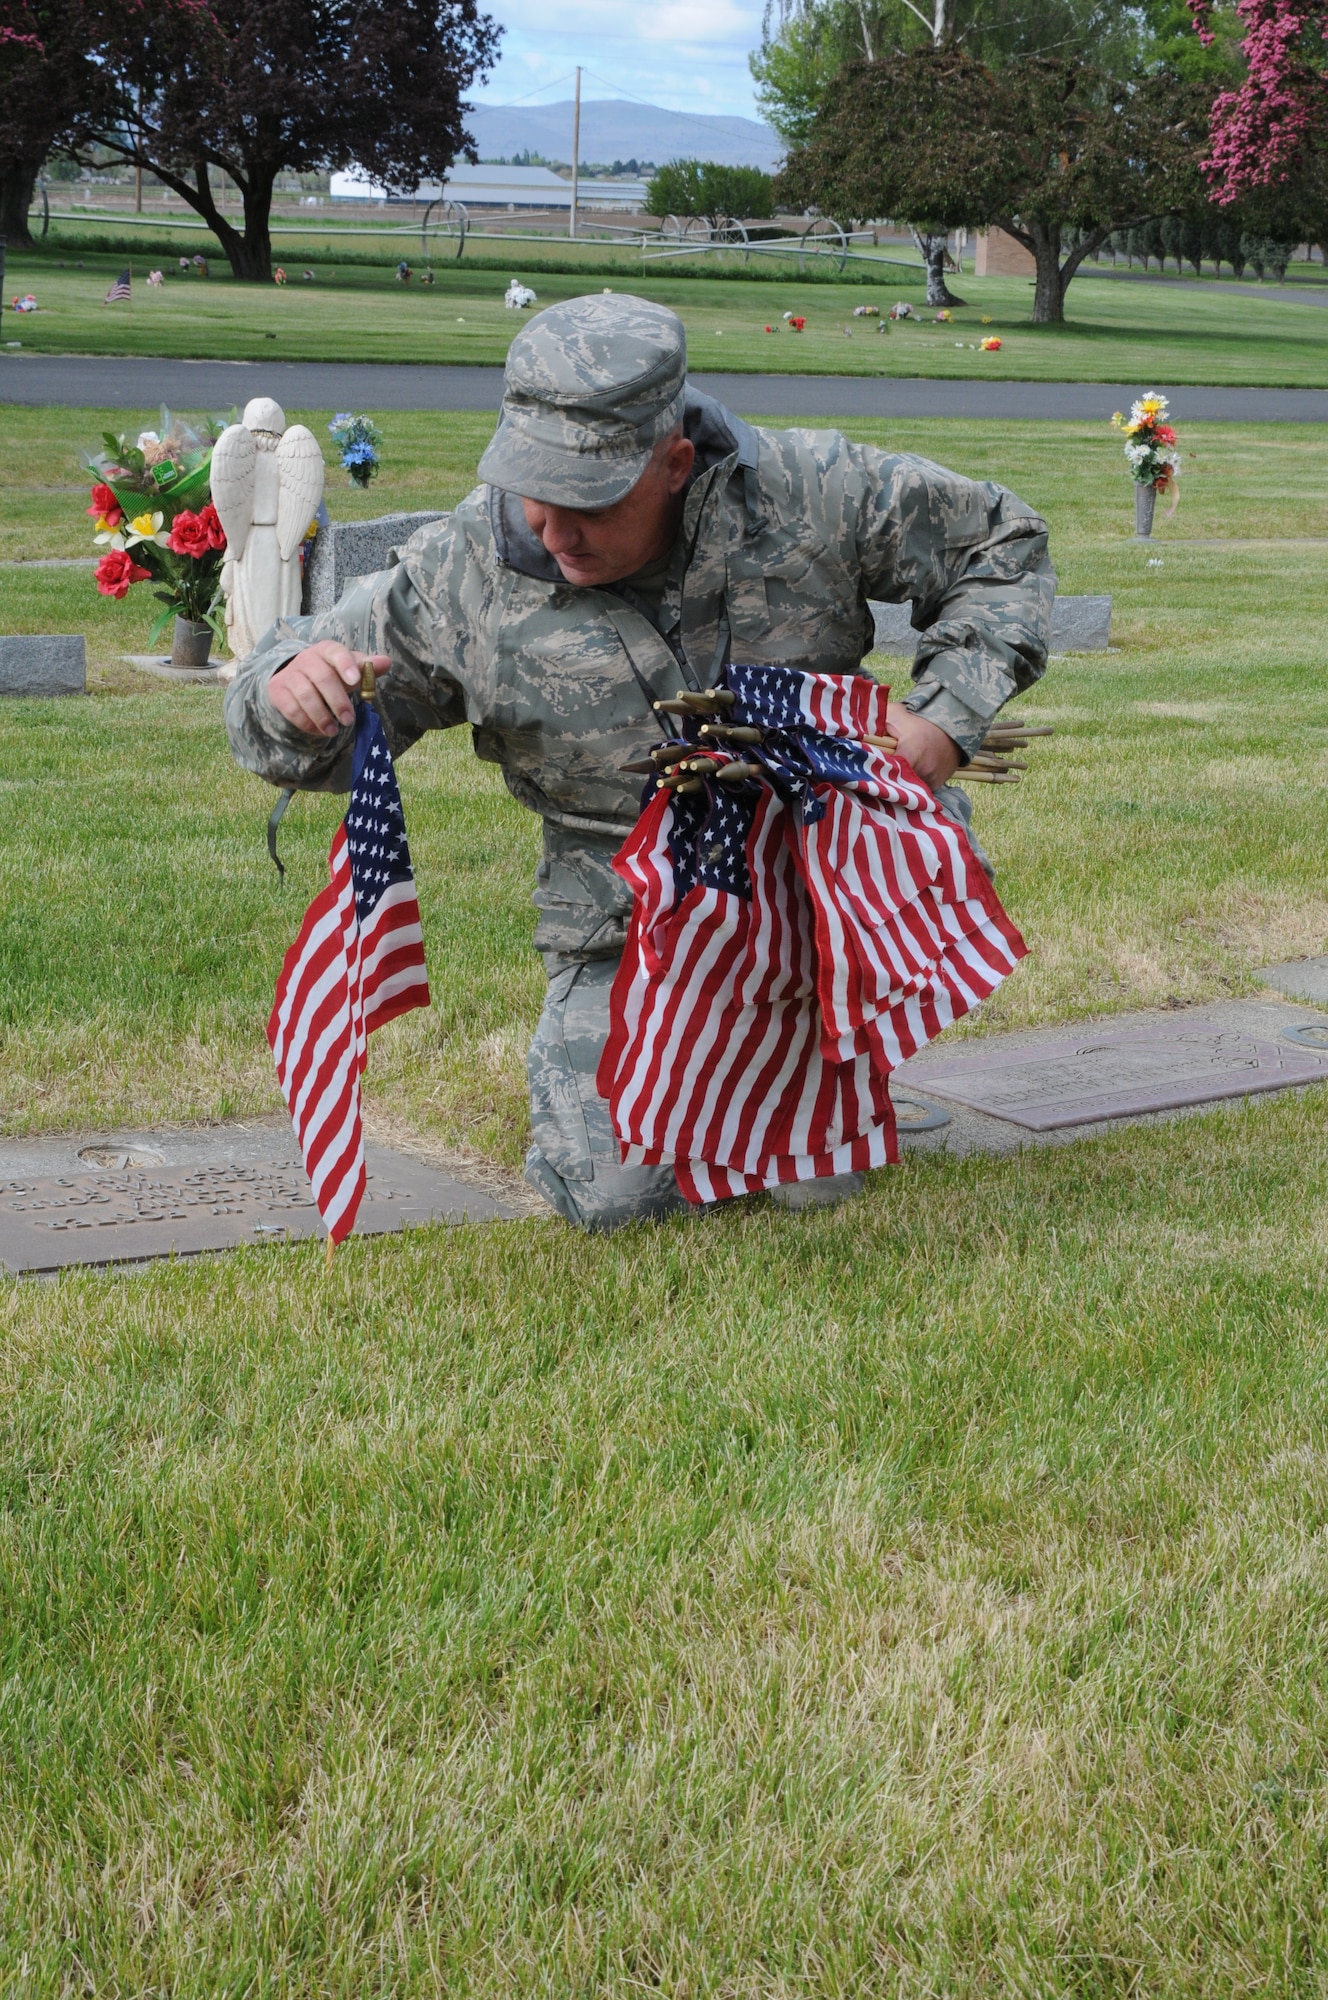 U.S. Air National Guard Master Sgt. Dave Smith, 173rd Fighter Wing, places a flag on the graves of local veterans at Mount Calvary Cemetery in Klamath Falls, Ore. May 23, 2013.  Members of the 173rd Fighter Wing spent their morning placing flags in honor of Memorial Day.  (U.S. Air National Guard photo by Master Sgt. Jennifer Shirar) RELEASED  